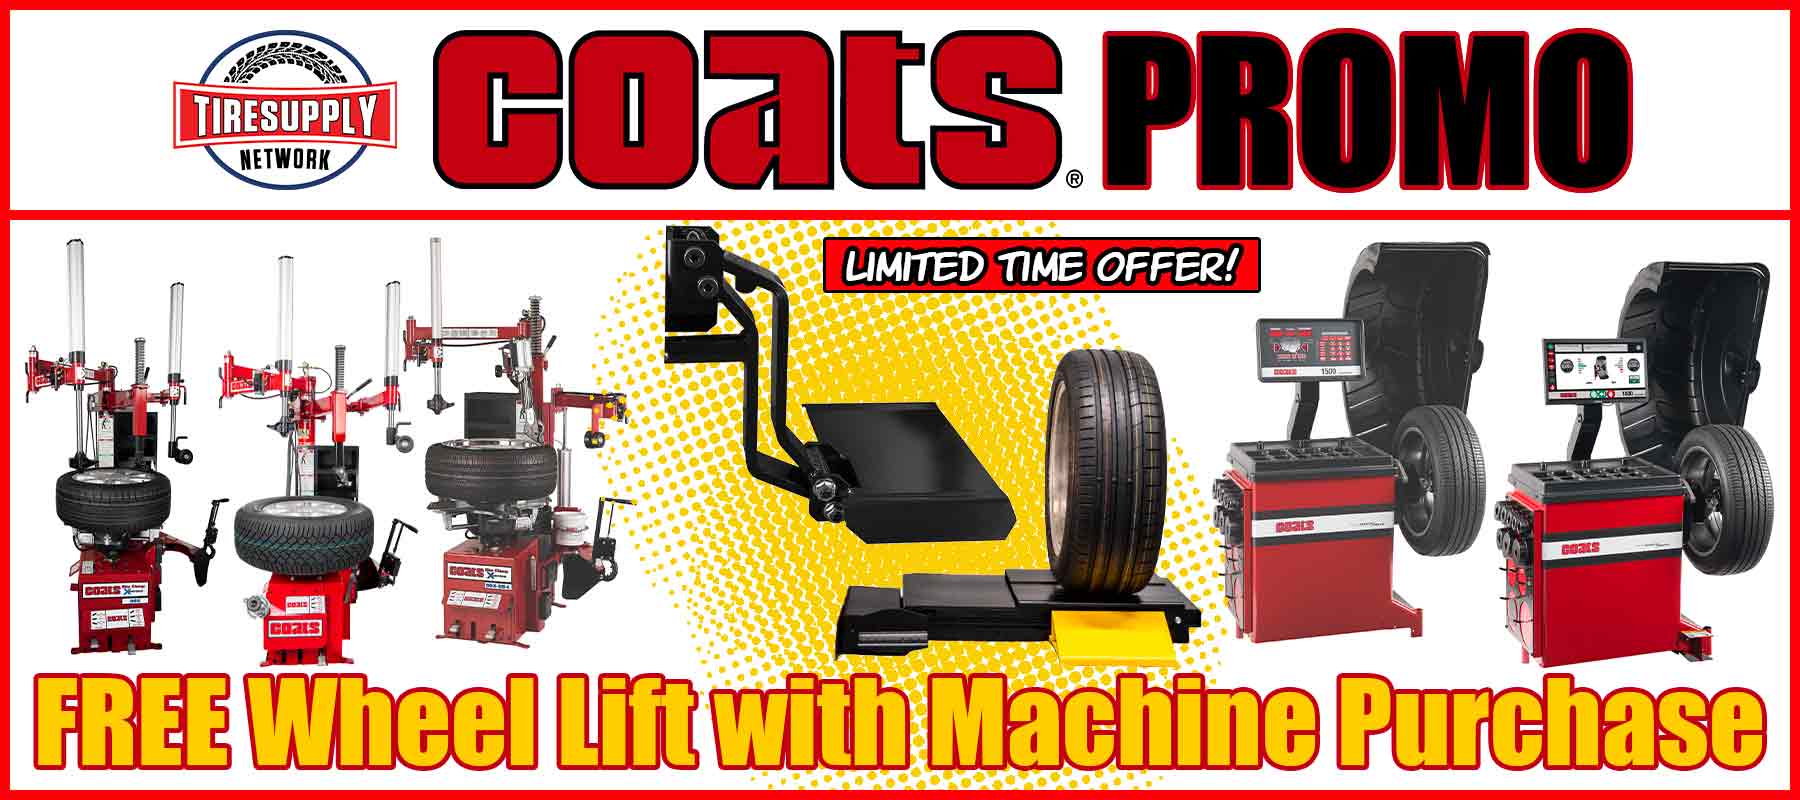 FREE Wheel Lift with Purchase of Select Coats Tire Changers and Wheel Balancers!